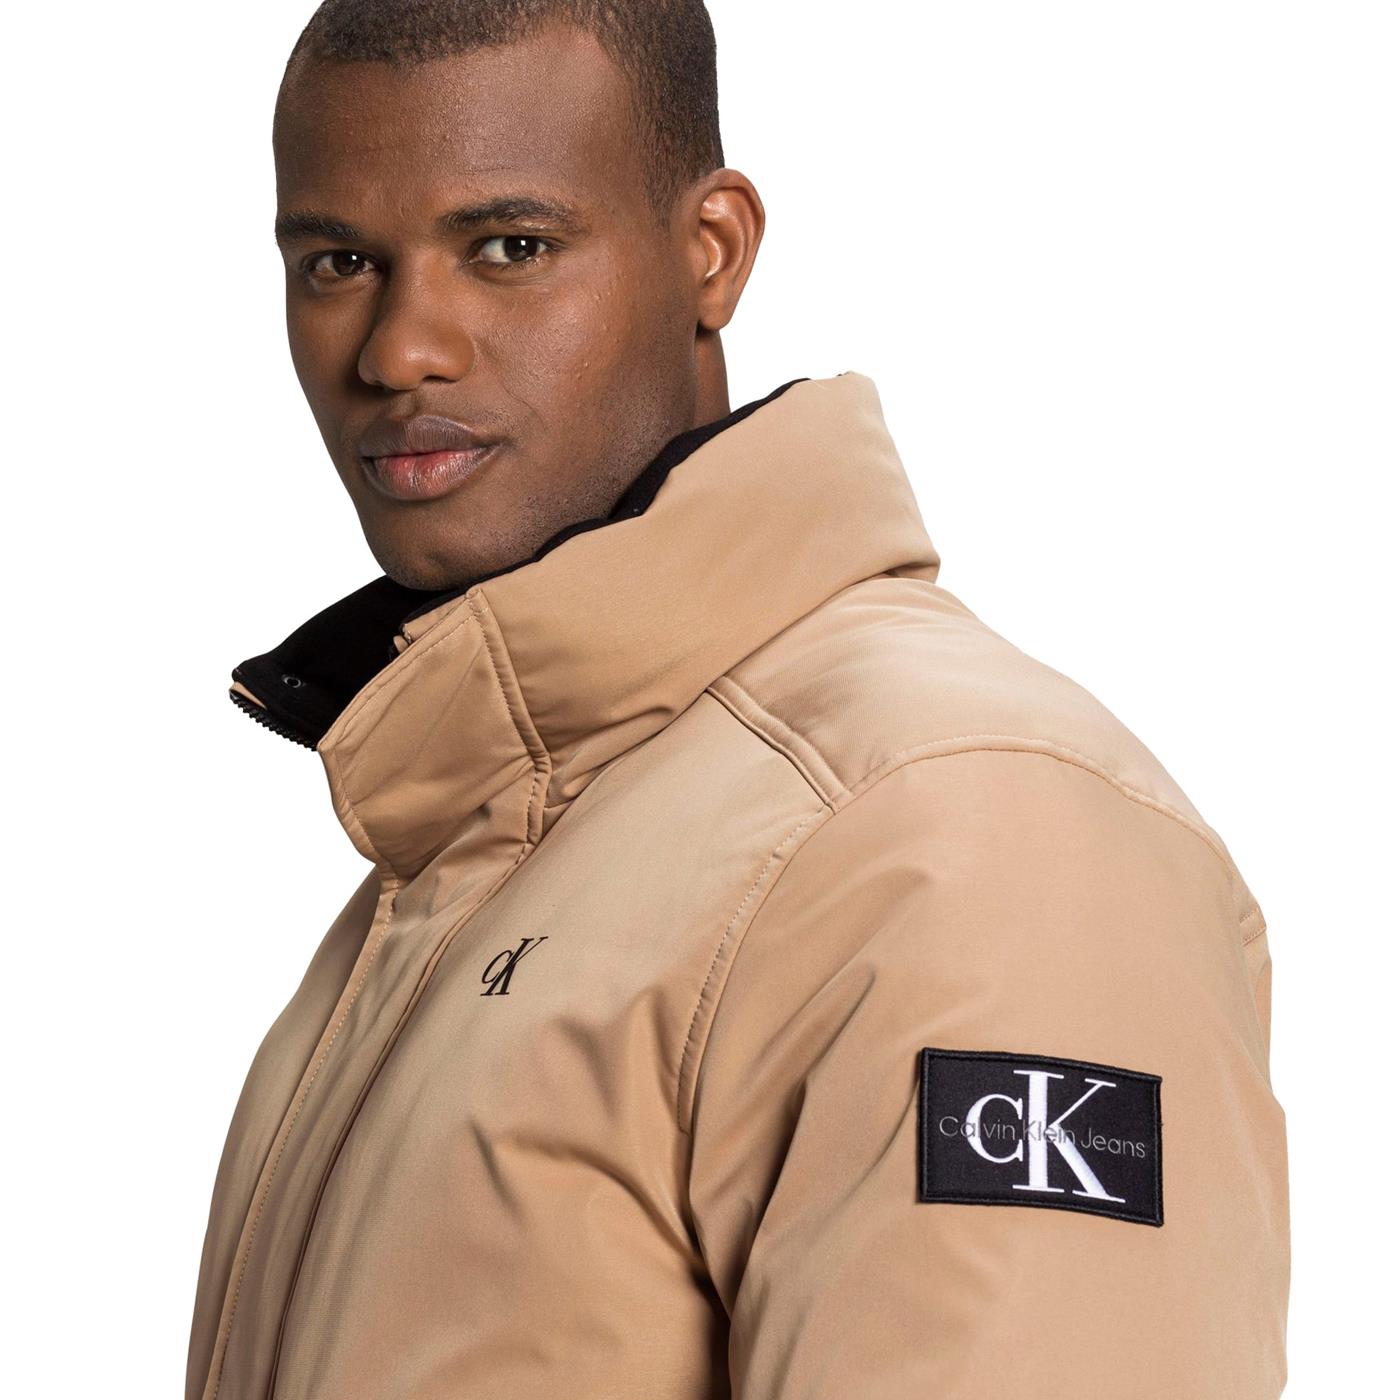 Non-Down Technical Bomber Jacket